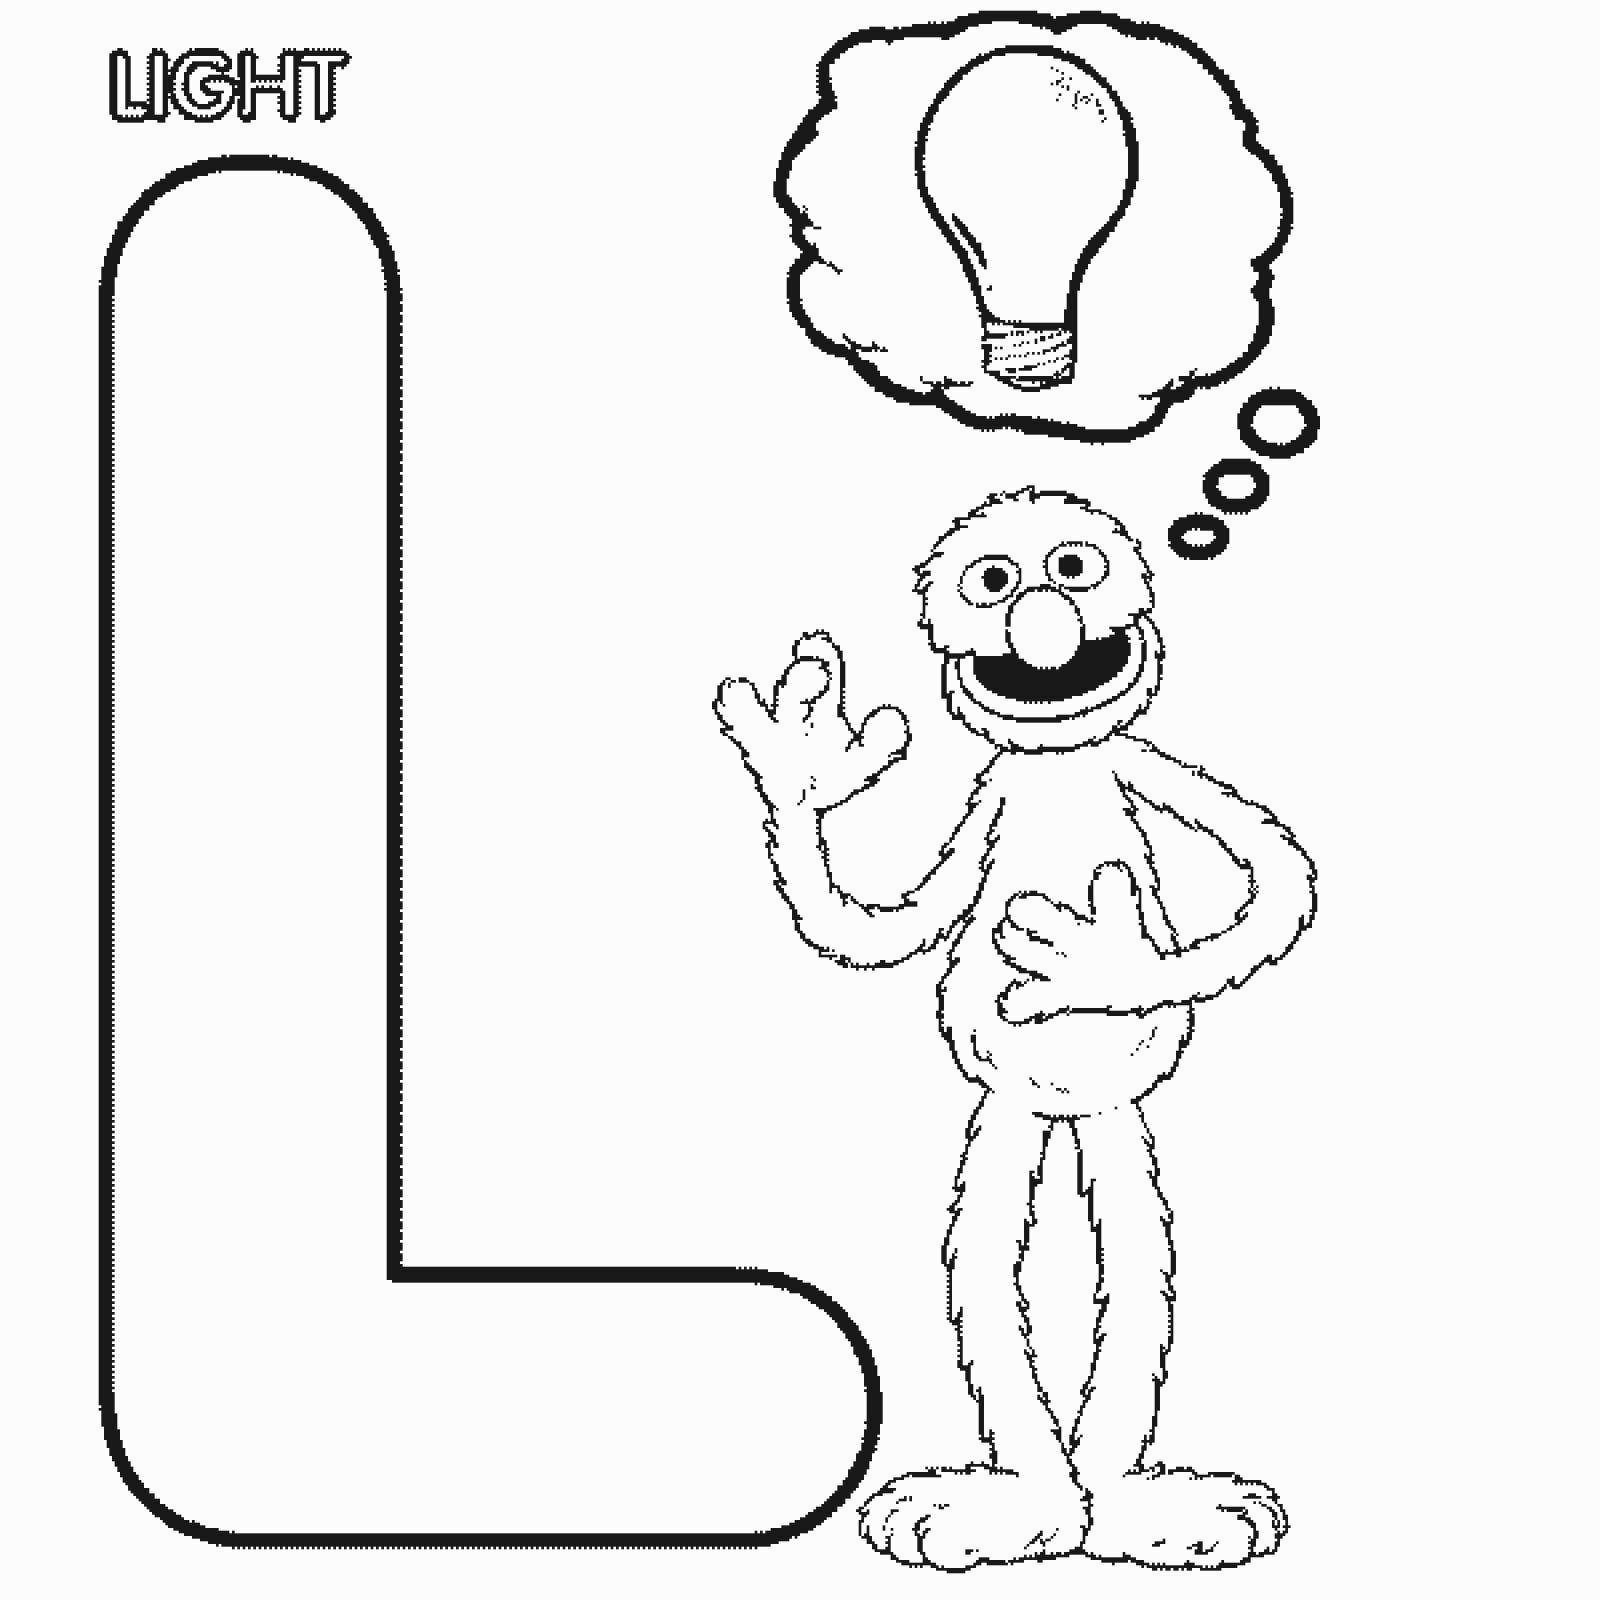 sesame-street-coloring-pages-letters-l - Preschool Crafts